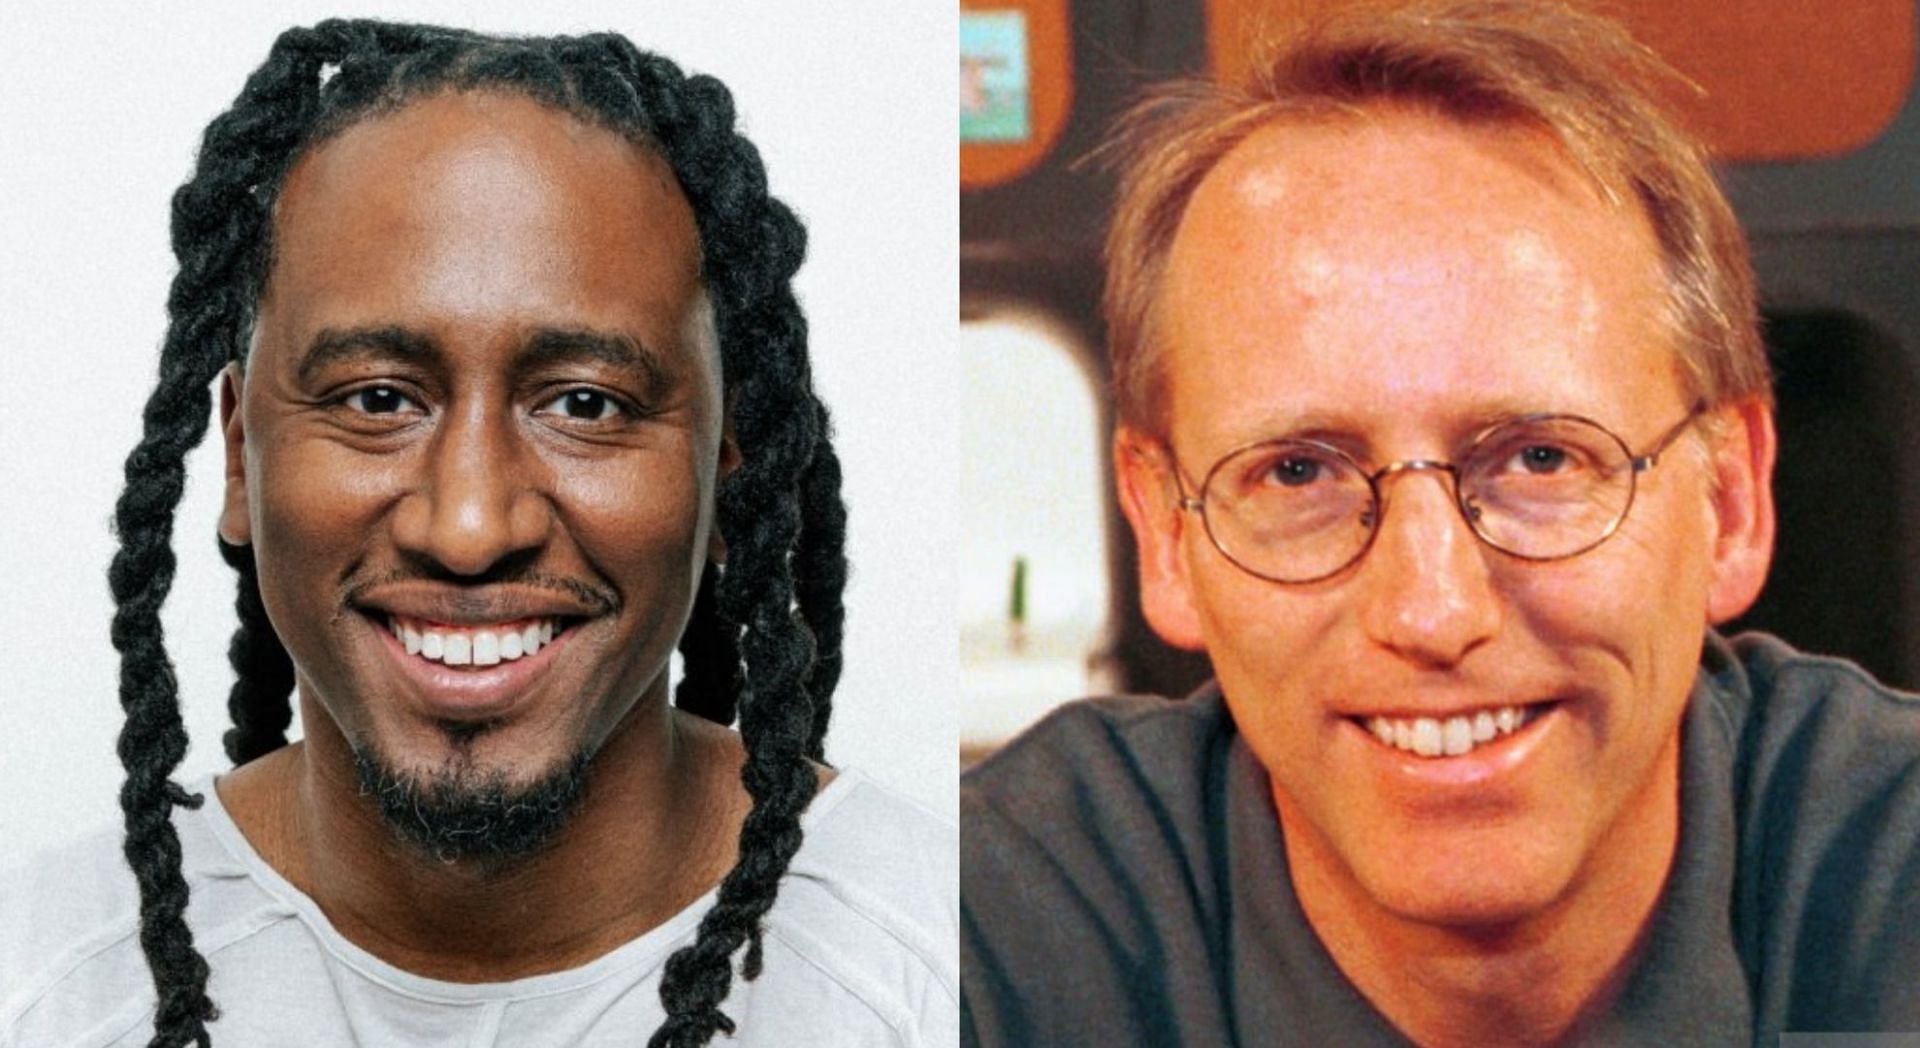 Scott Adams sat for an interview with Hotep Jesus in the wake of his controversy (Image via Monero Bull/Twitter and Getty Images)